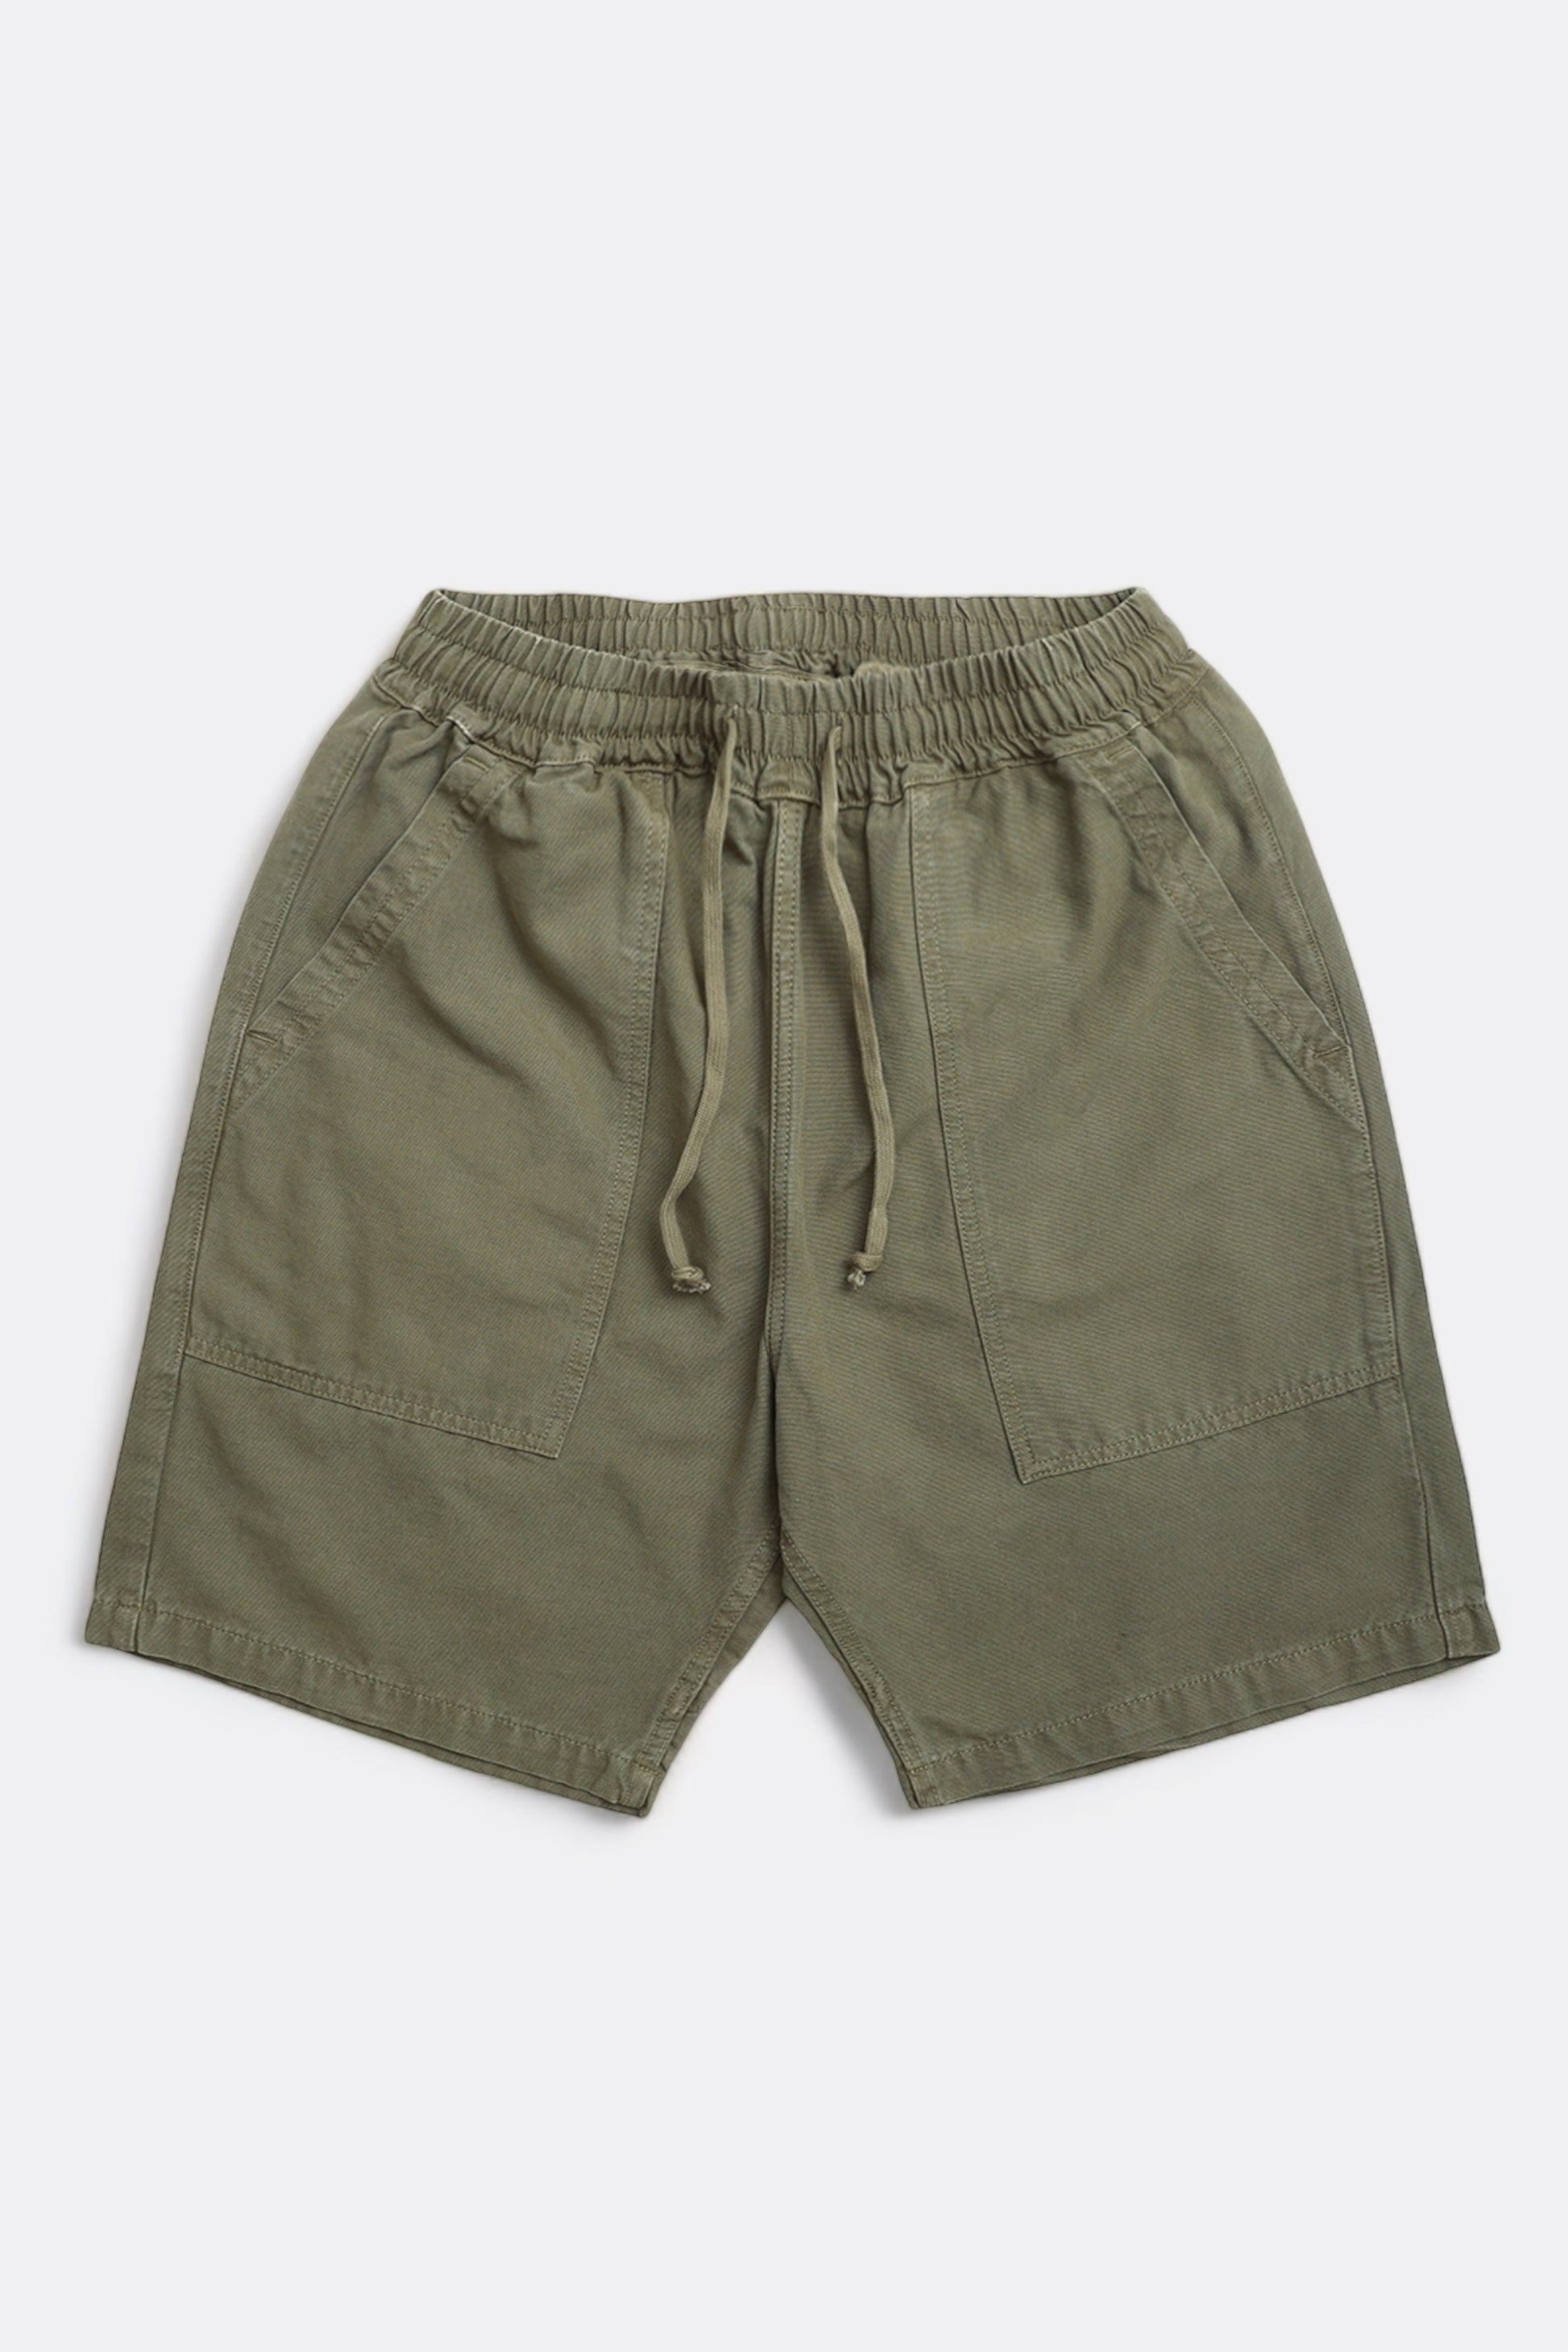 Service Works - Canvas Chef Shorts (Olive)